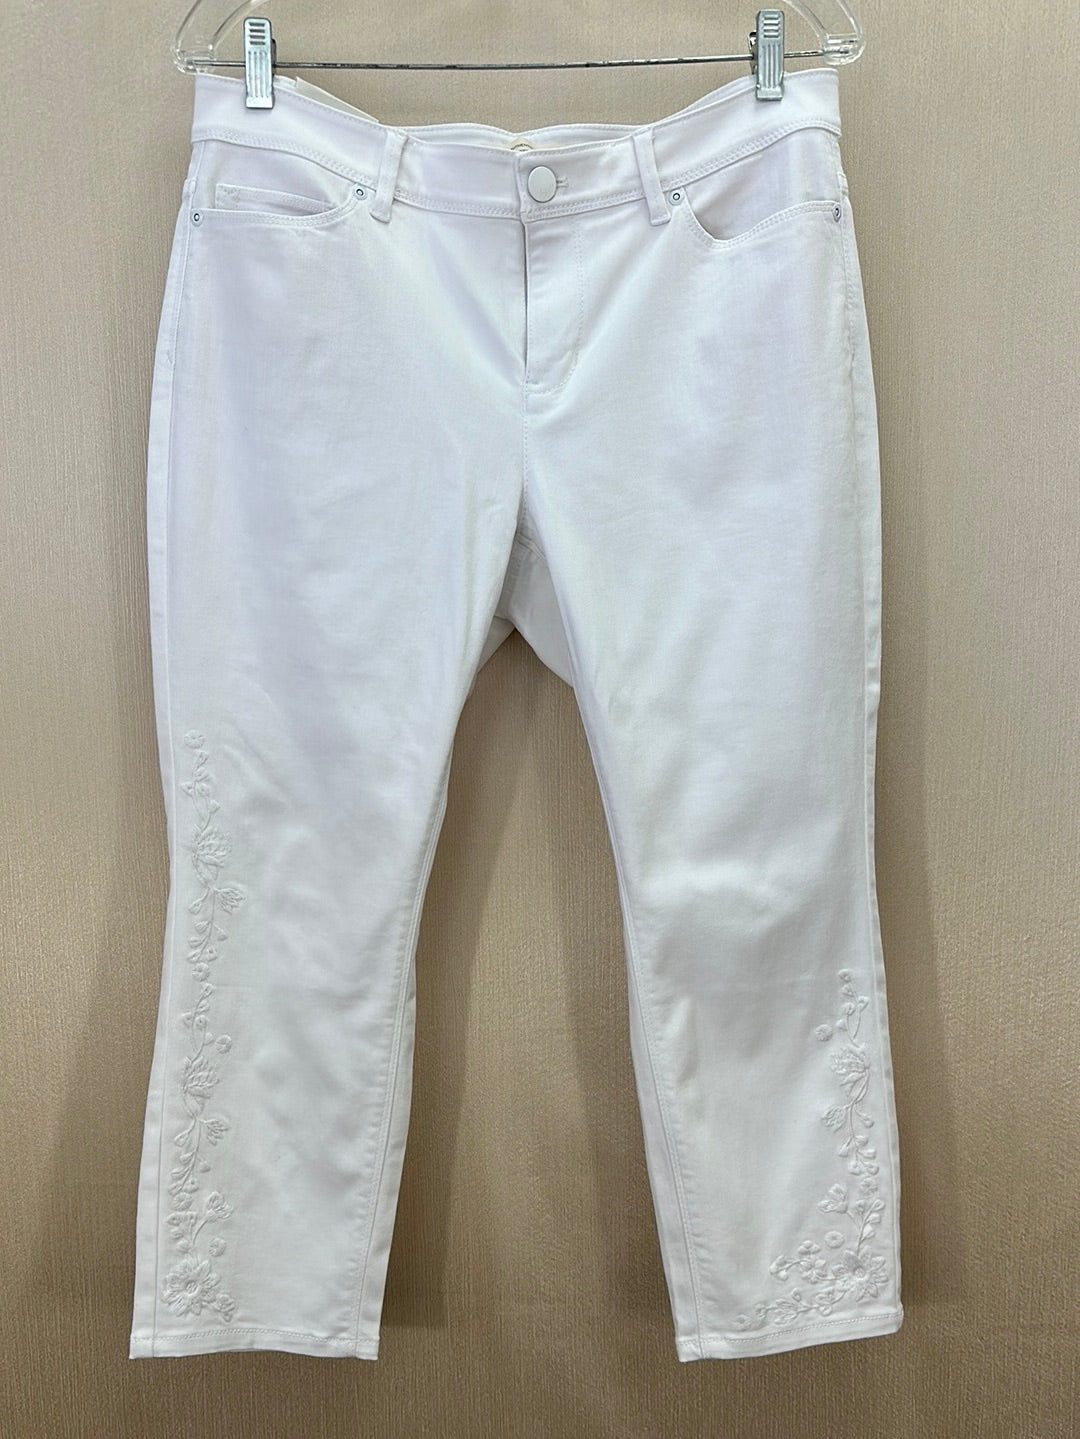 NWT - J JILL white Floral Embroidered Cropped Authentic Fit Jeans - 12P